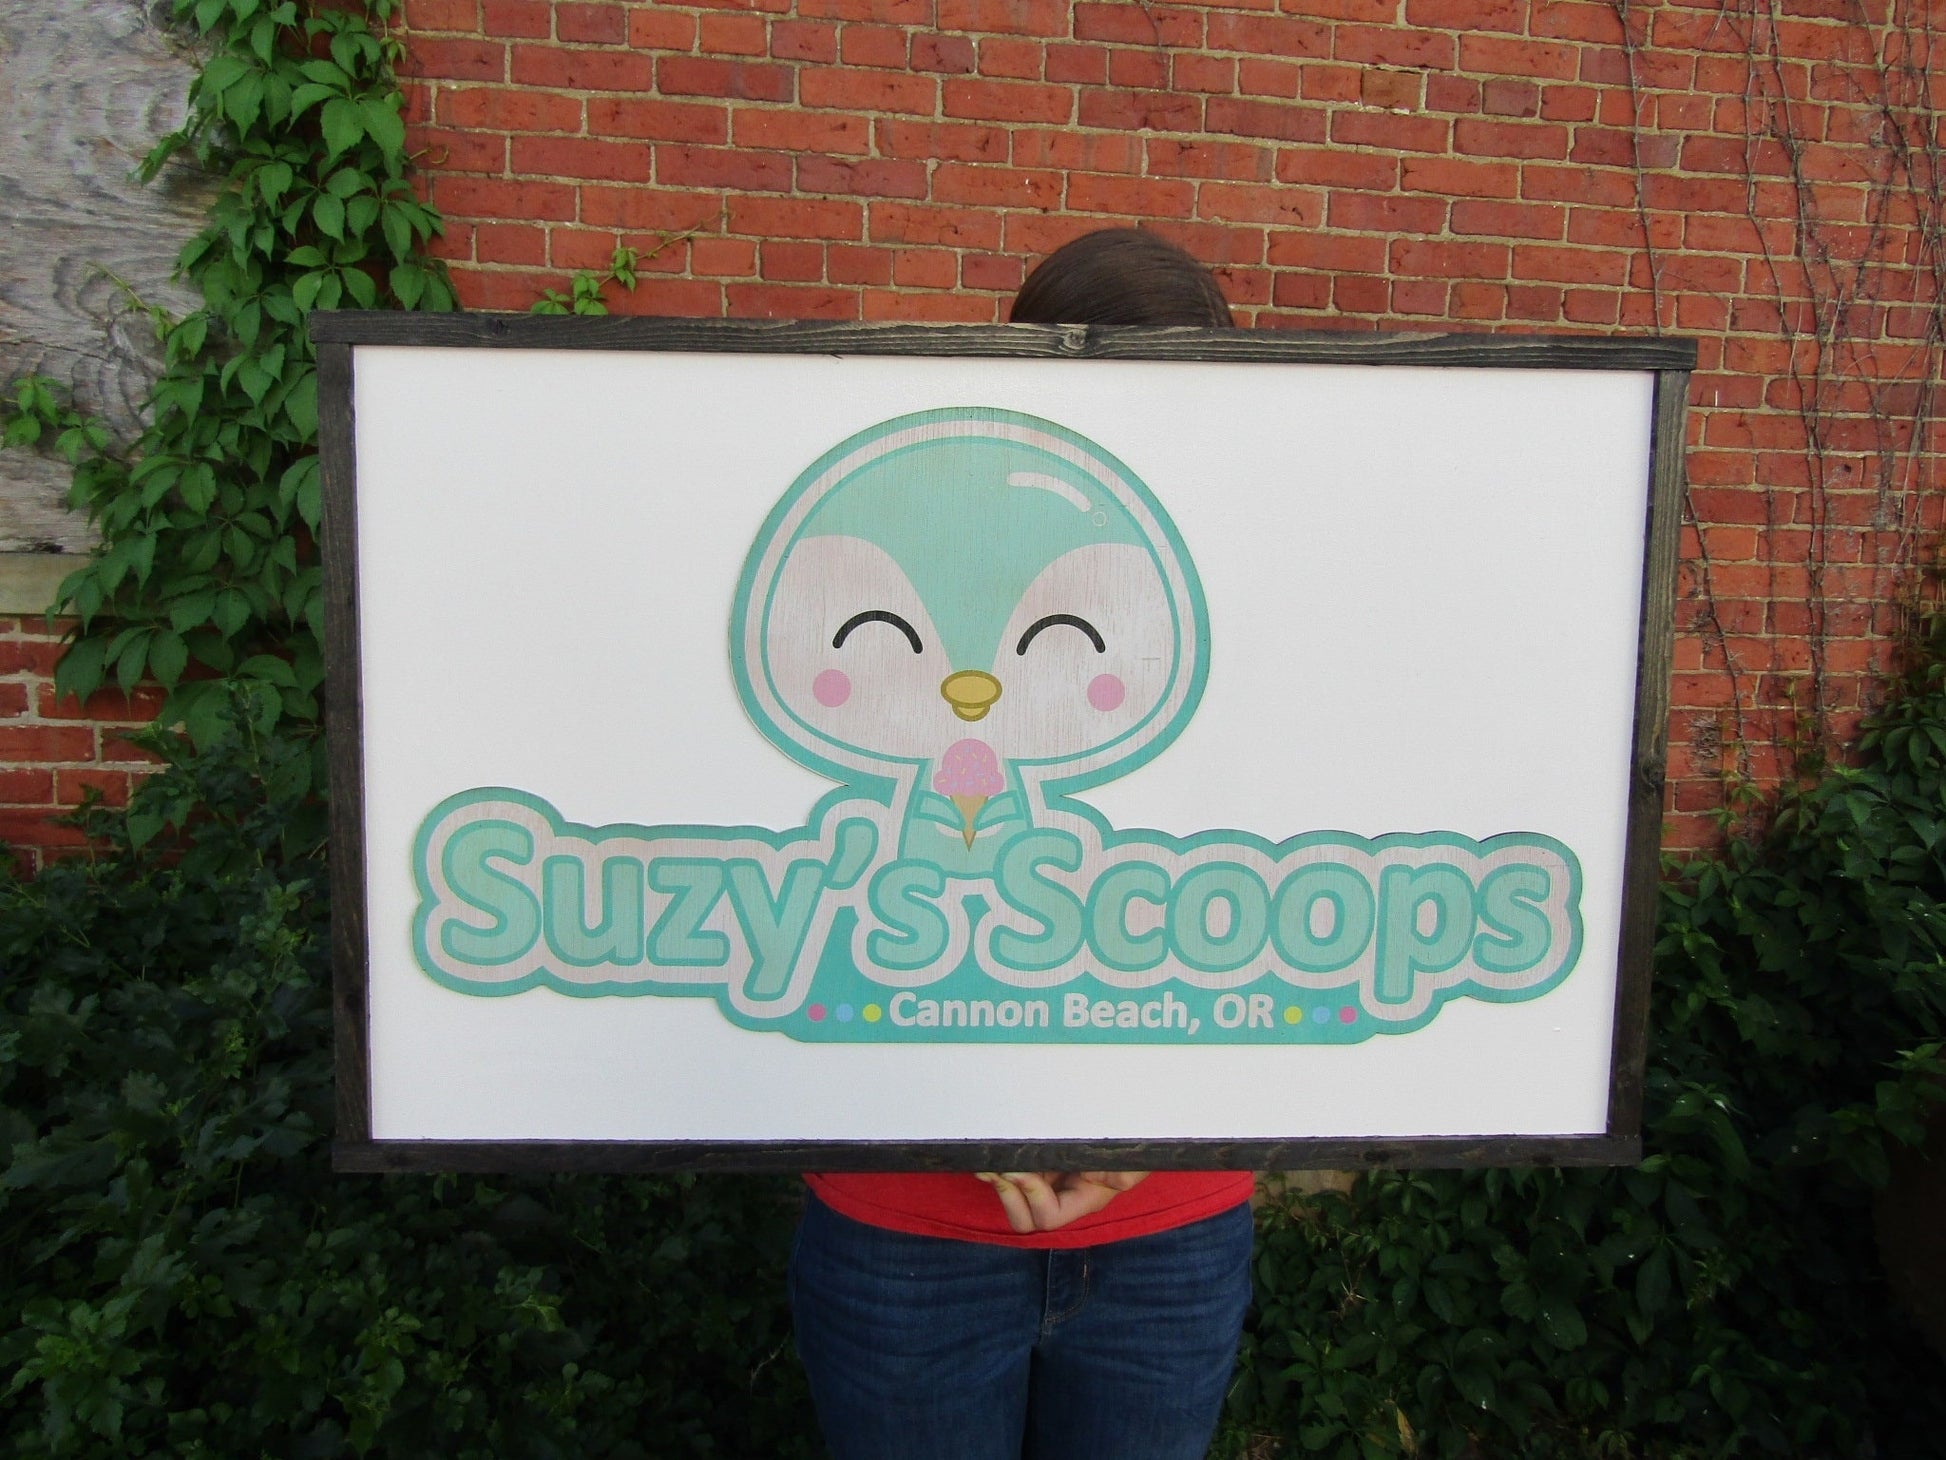 Cute Outdoor Ice Cream Scoops Shop Teal Mint Color Penguin Printed Hanging Sign Logo Image Custom Personalized Handmade Made To Order Wooden